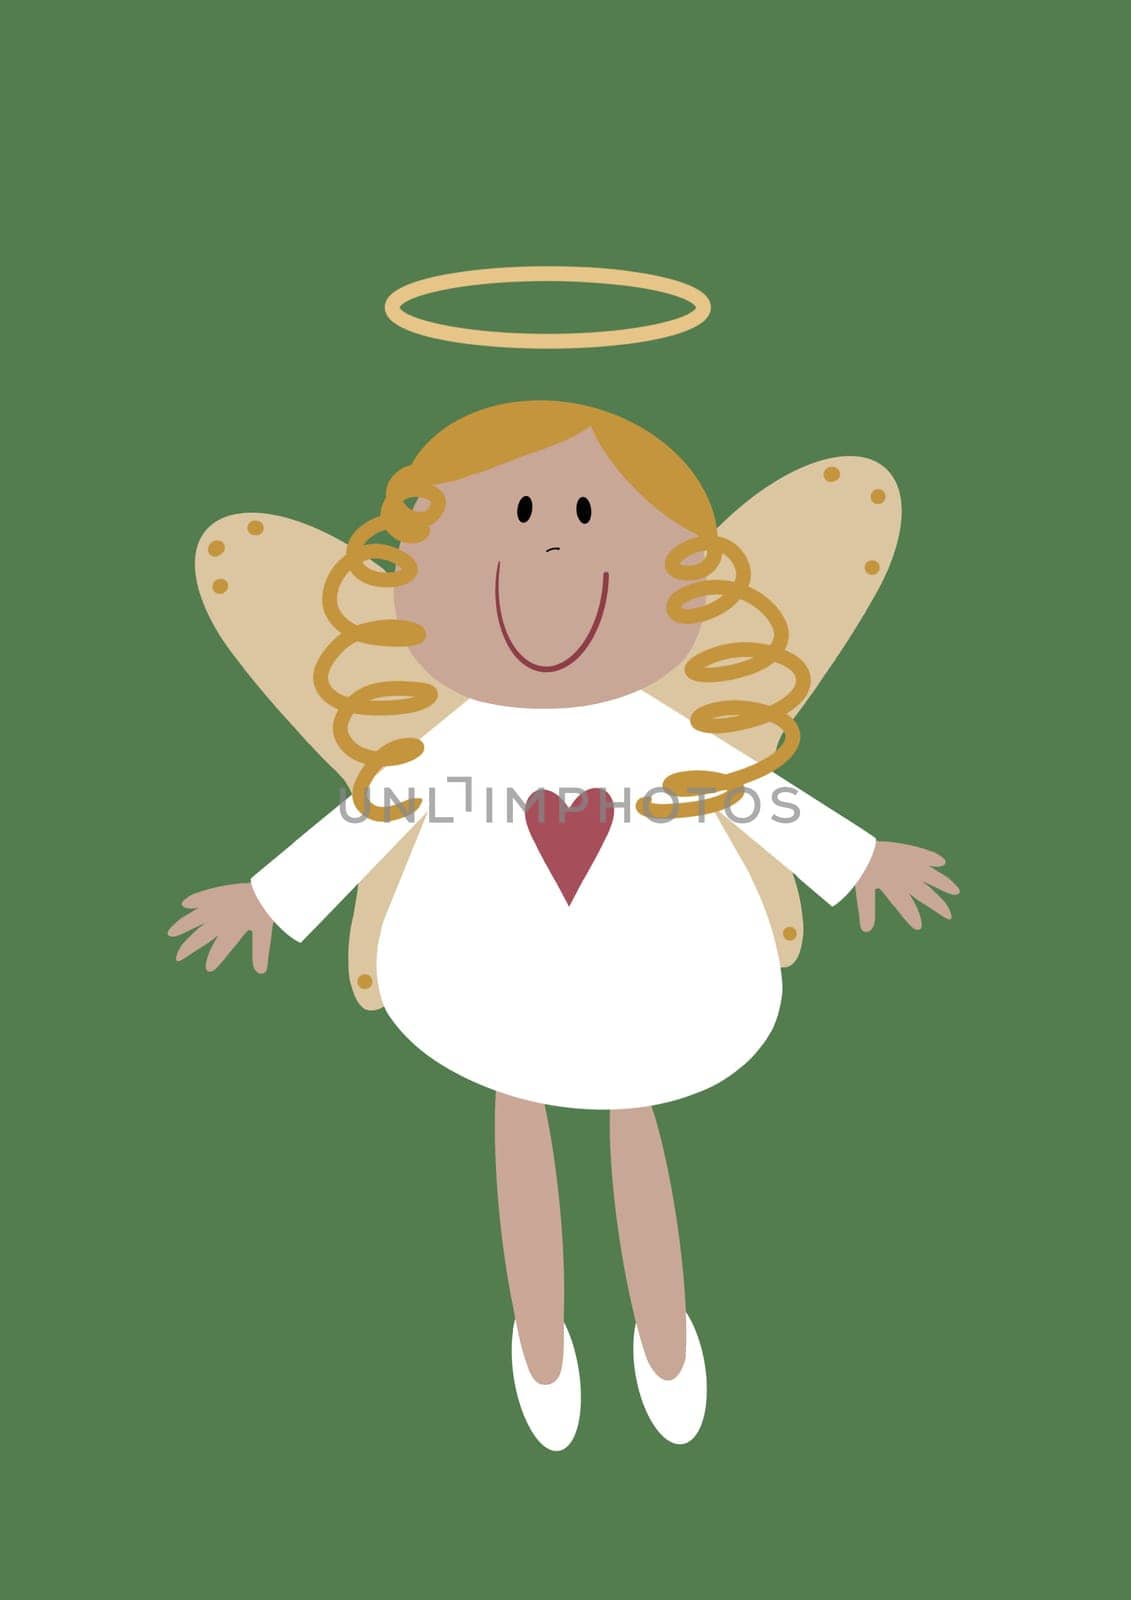 Cute Christmas angel illustration in a quirky cartoon style. Cartoon rustic folk art angel design. This simple nativity angel has a golden halo and heart motif on her dress.. Perfect character as a Christmas tree topper.